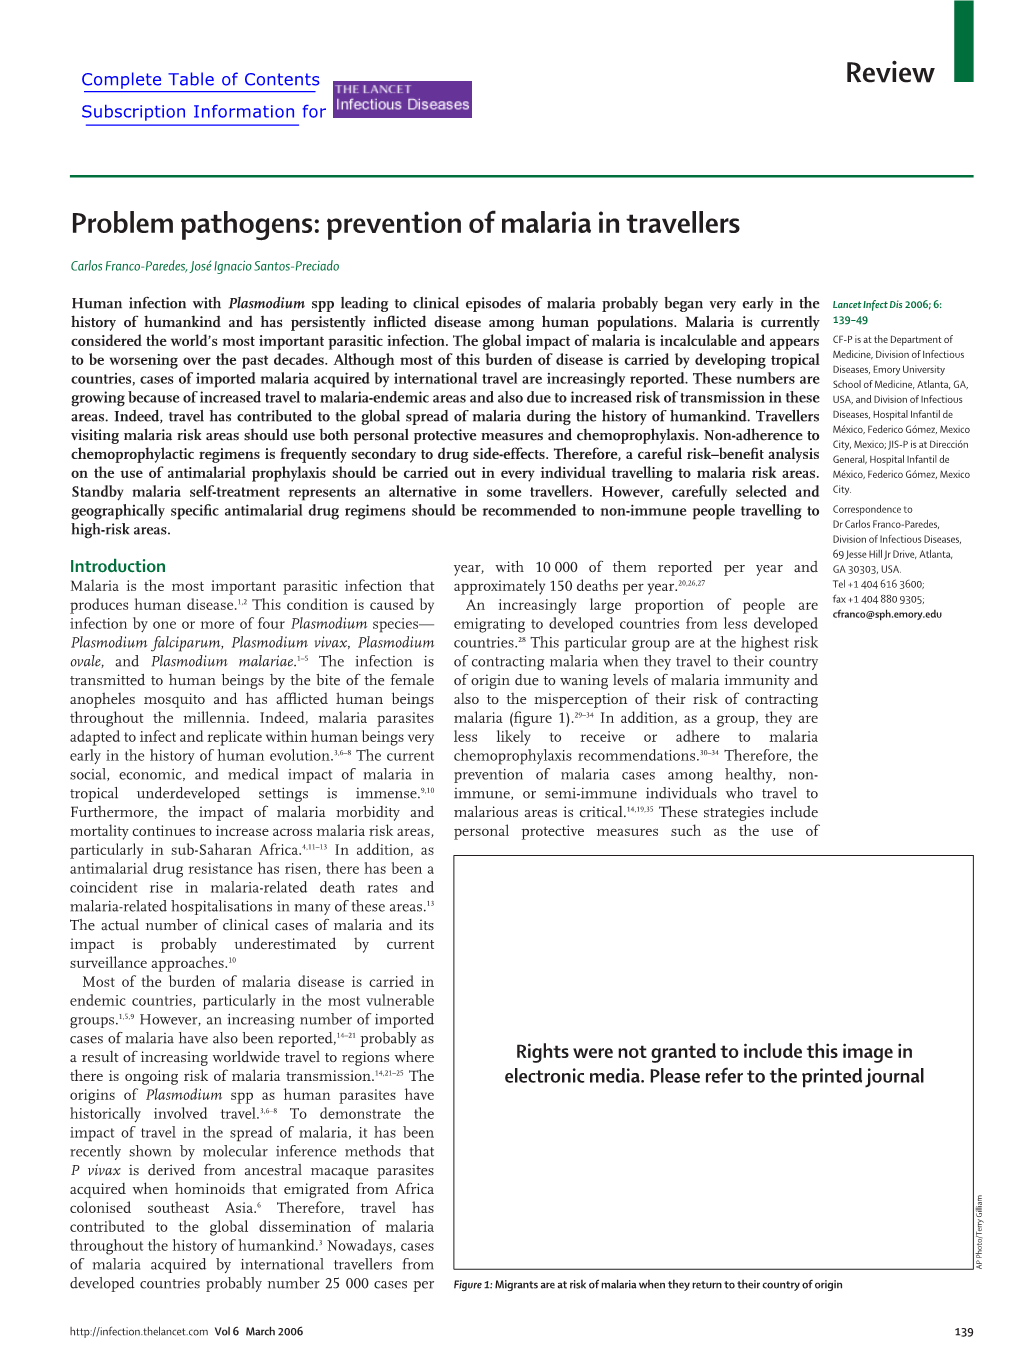 Prevention of Malaria in Travellers